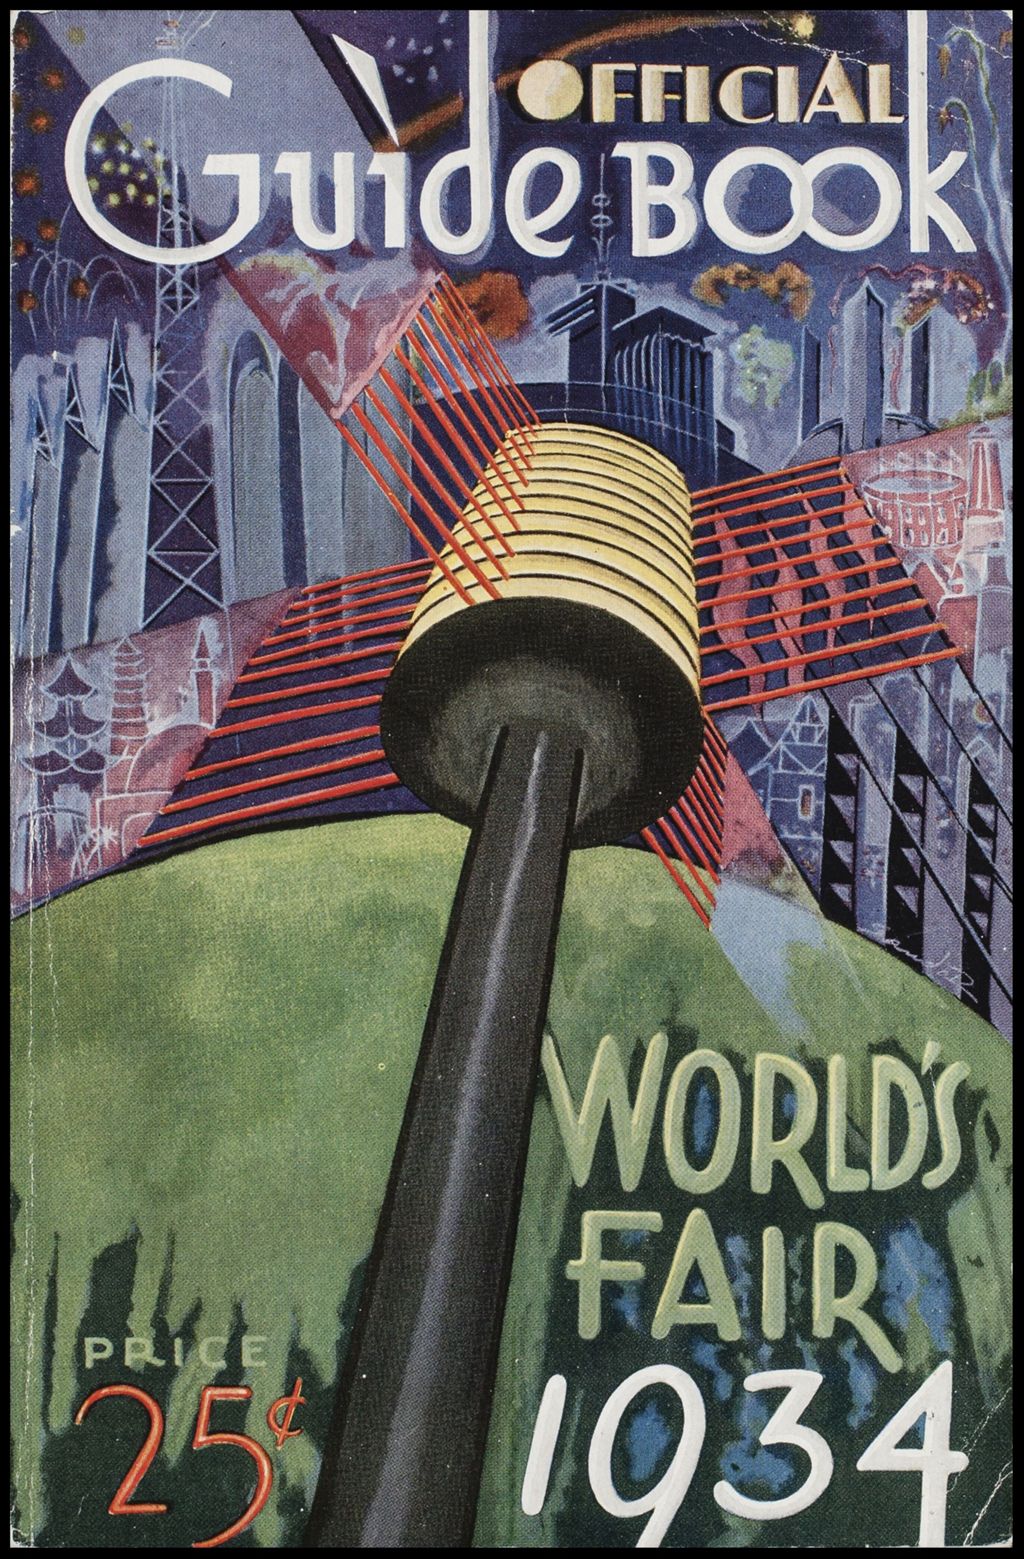 Official Guidebook of The World's Fair, 1934 (Folder 16-176)